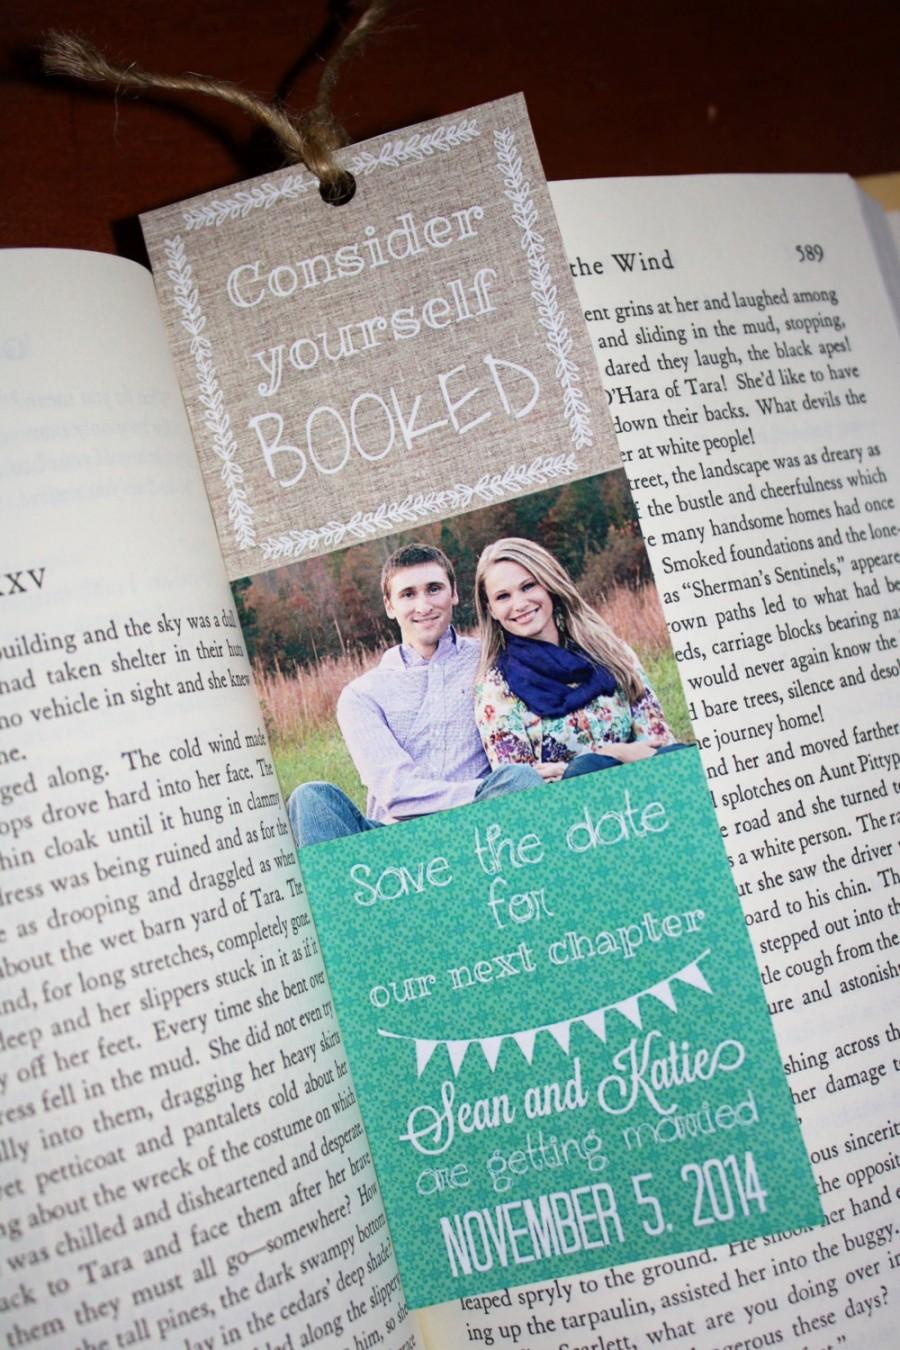 Wedding - Save the Date Bookmarks - Any Event! FREE SHIPPING. Literary, Library Weddings-Storybook, book, fairytale.Custom colors, text.PDF or Printed